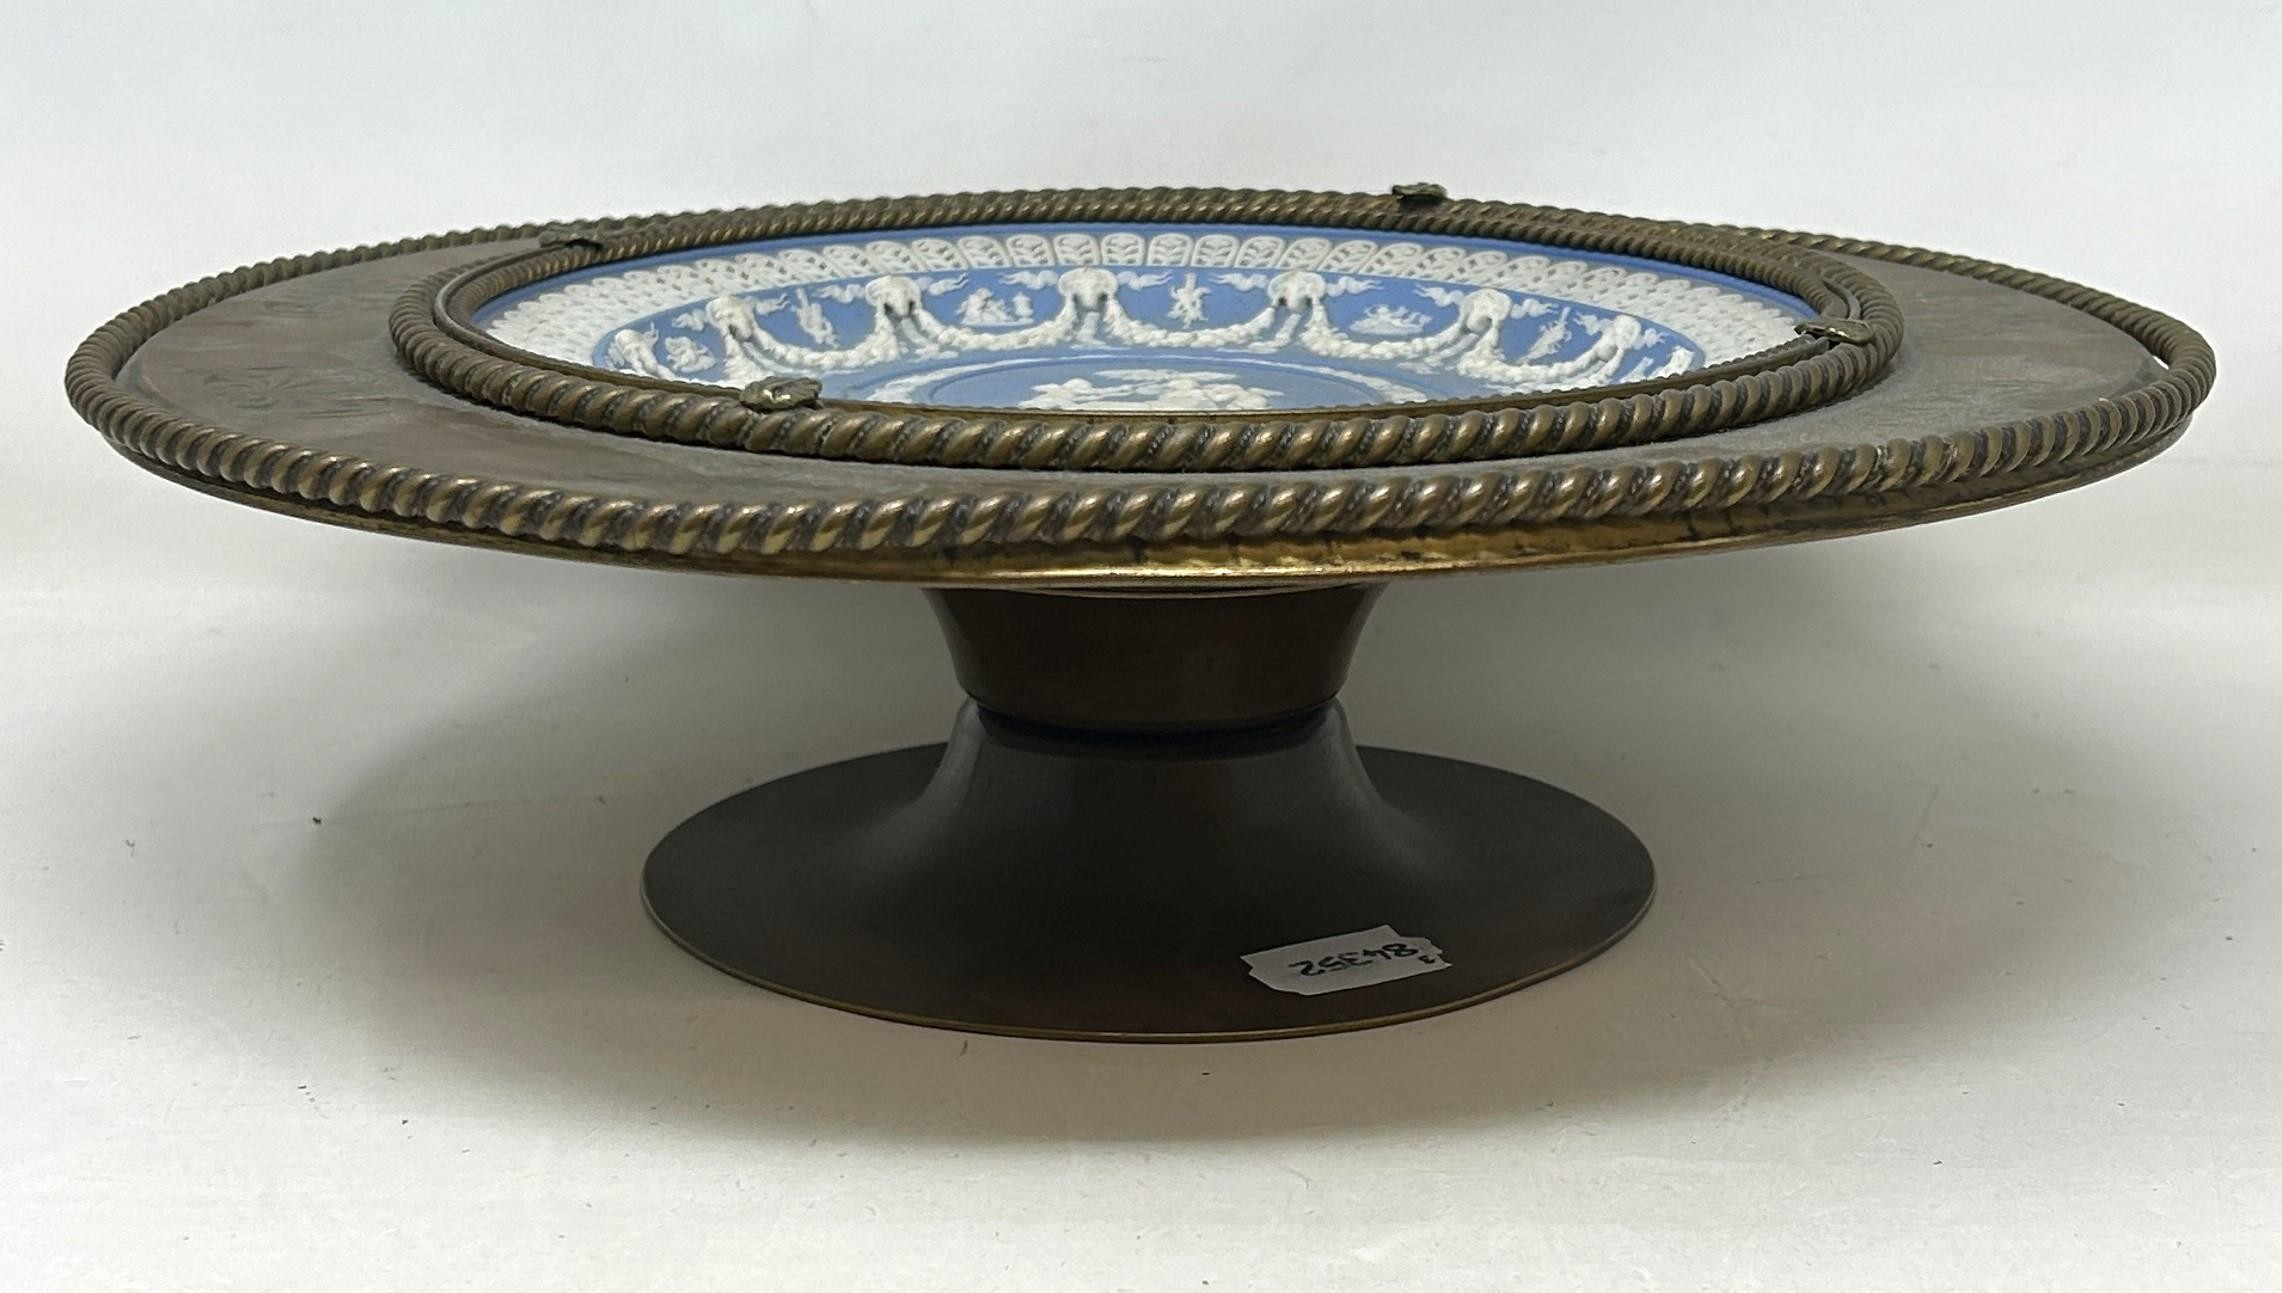 A Wedgwood style Jasperware plate, inset into a brass mount with engraved decoration, 33 cm diameter - Image 2 of 3